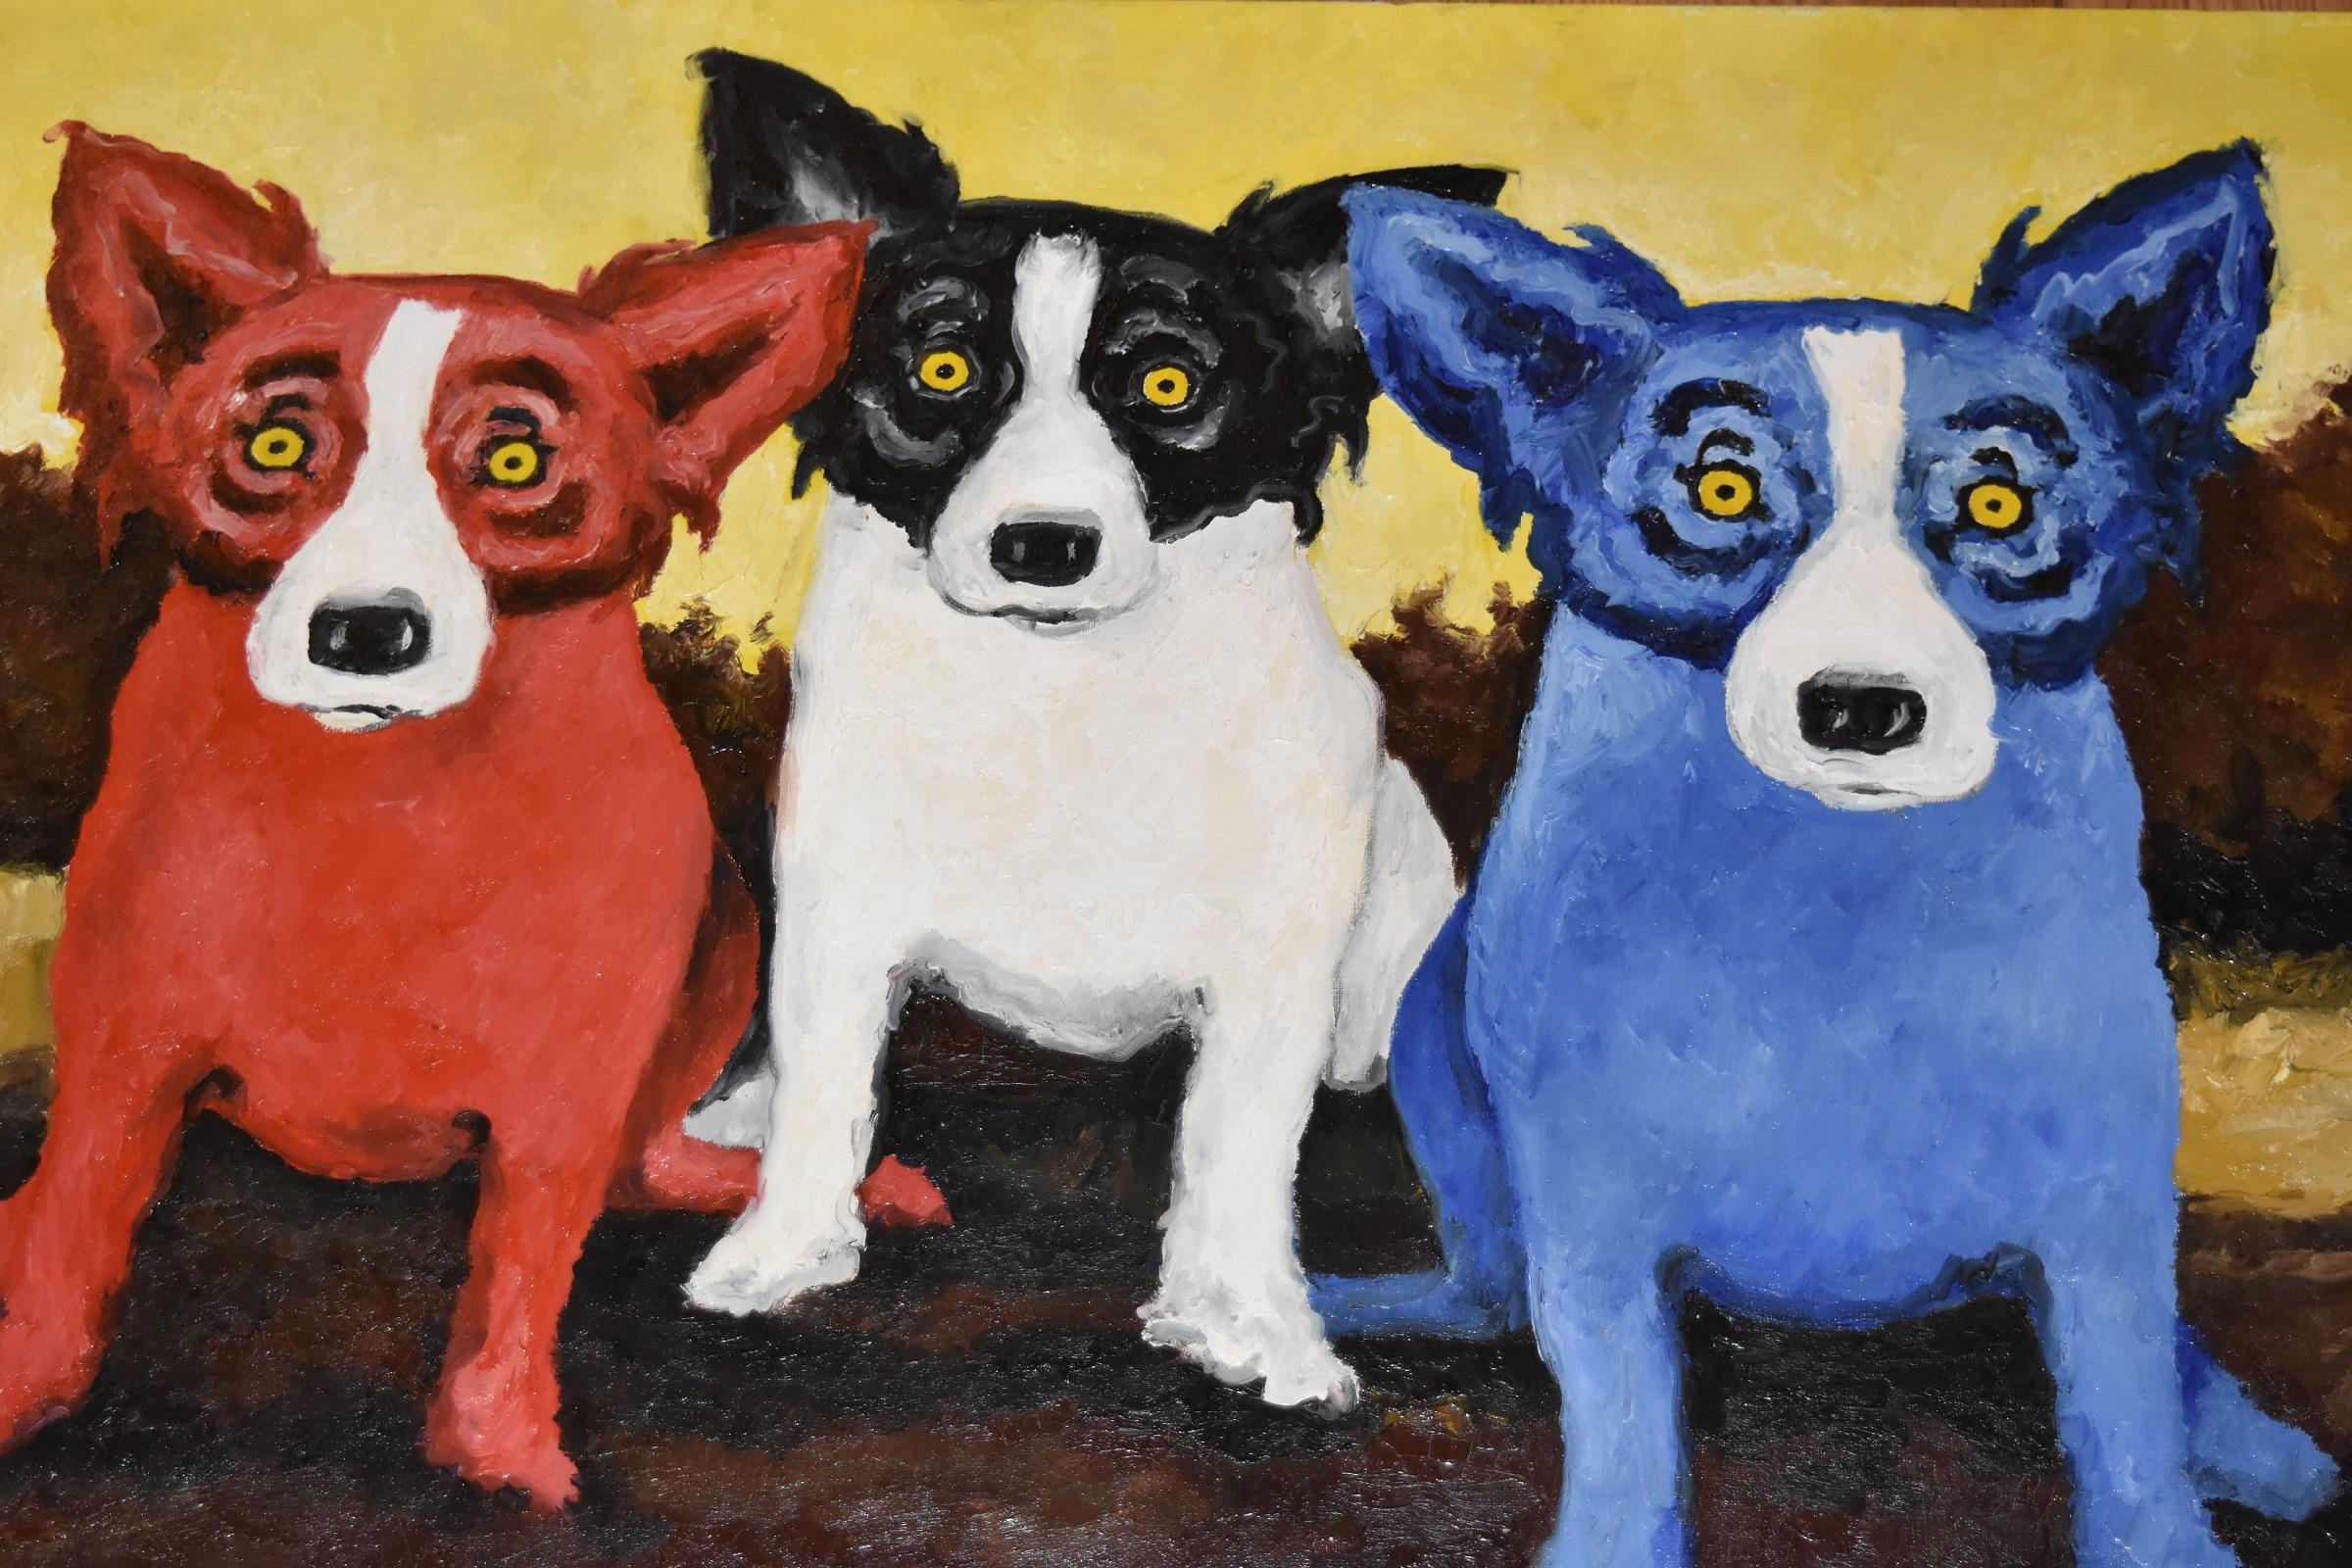 Original - Split Personality - Signed Oil on Canvas Blue Dog - Pop Art Painting by George Rodrigue